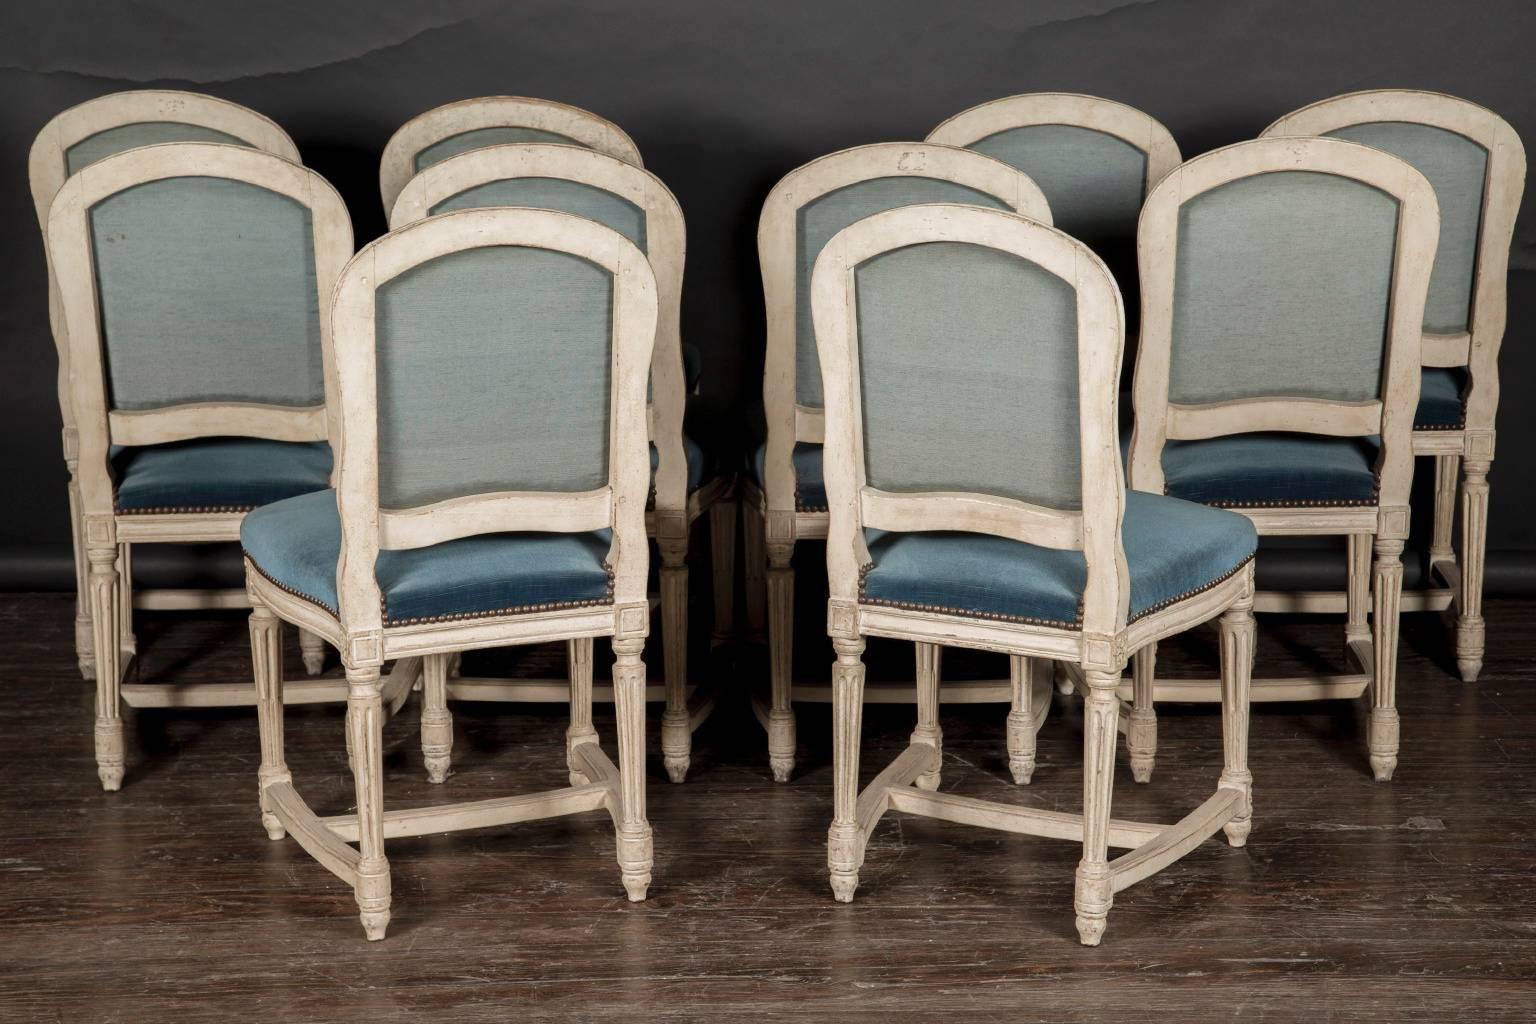 Set of Ten 19th Century Painted Chairs 1